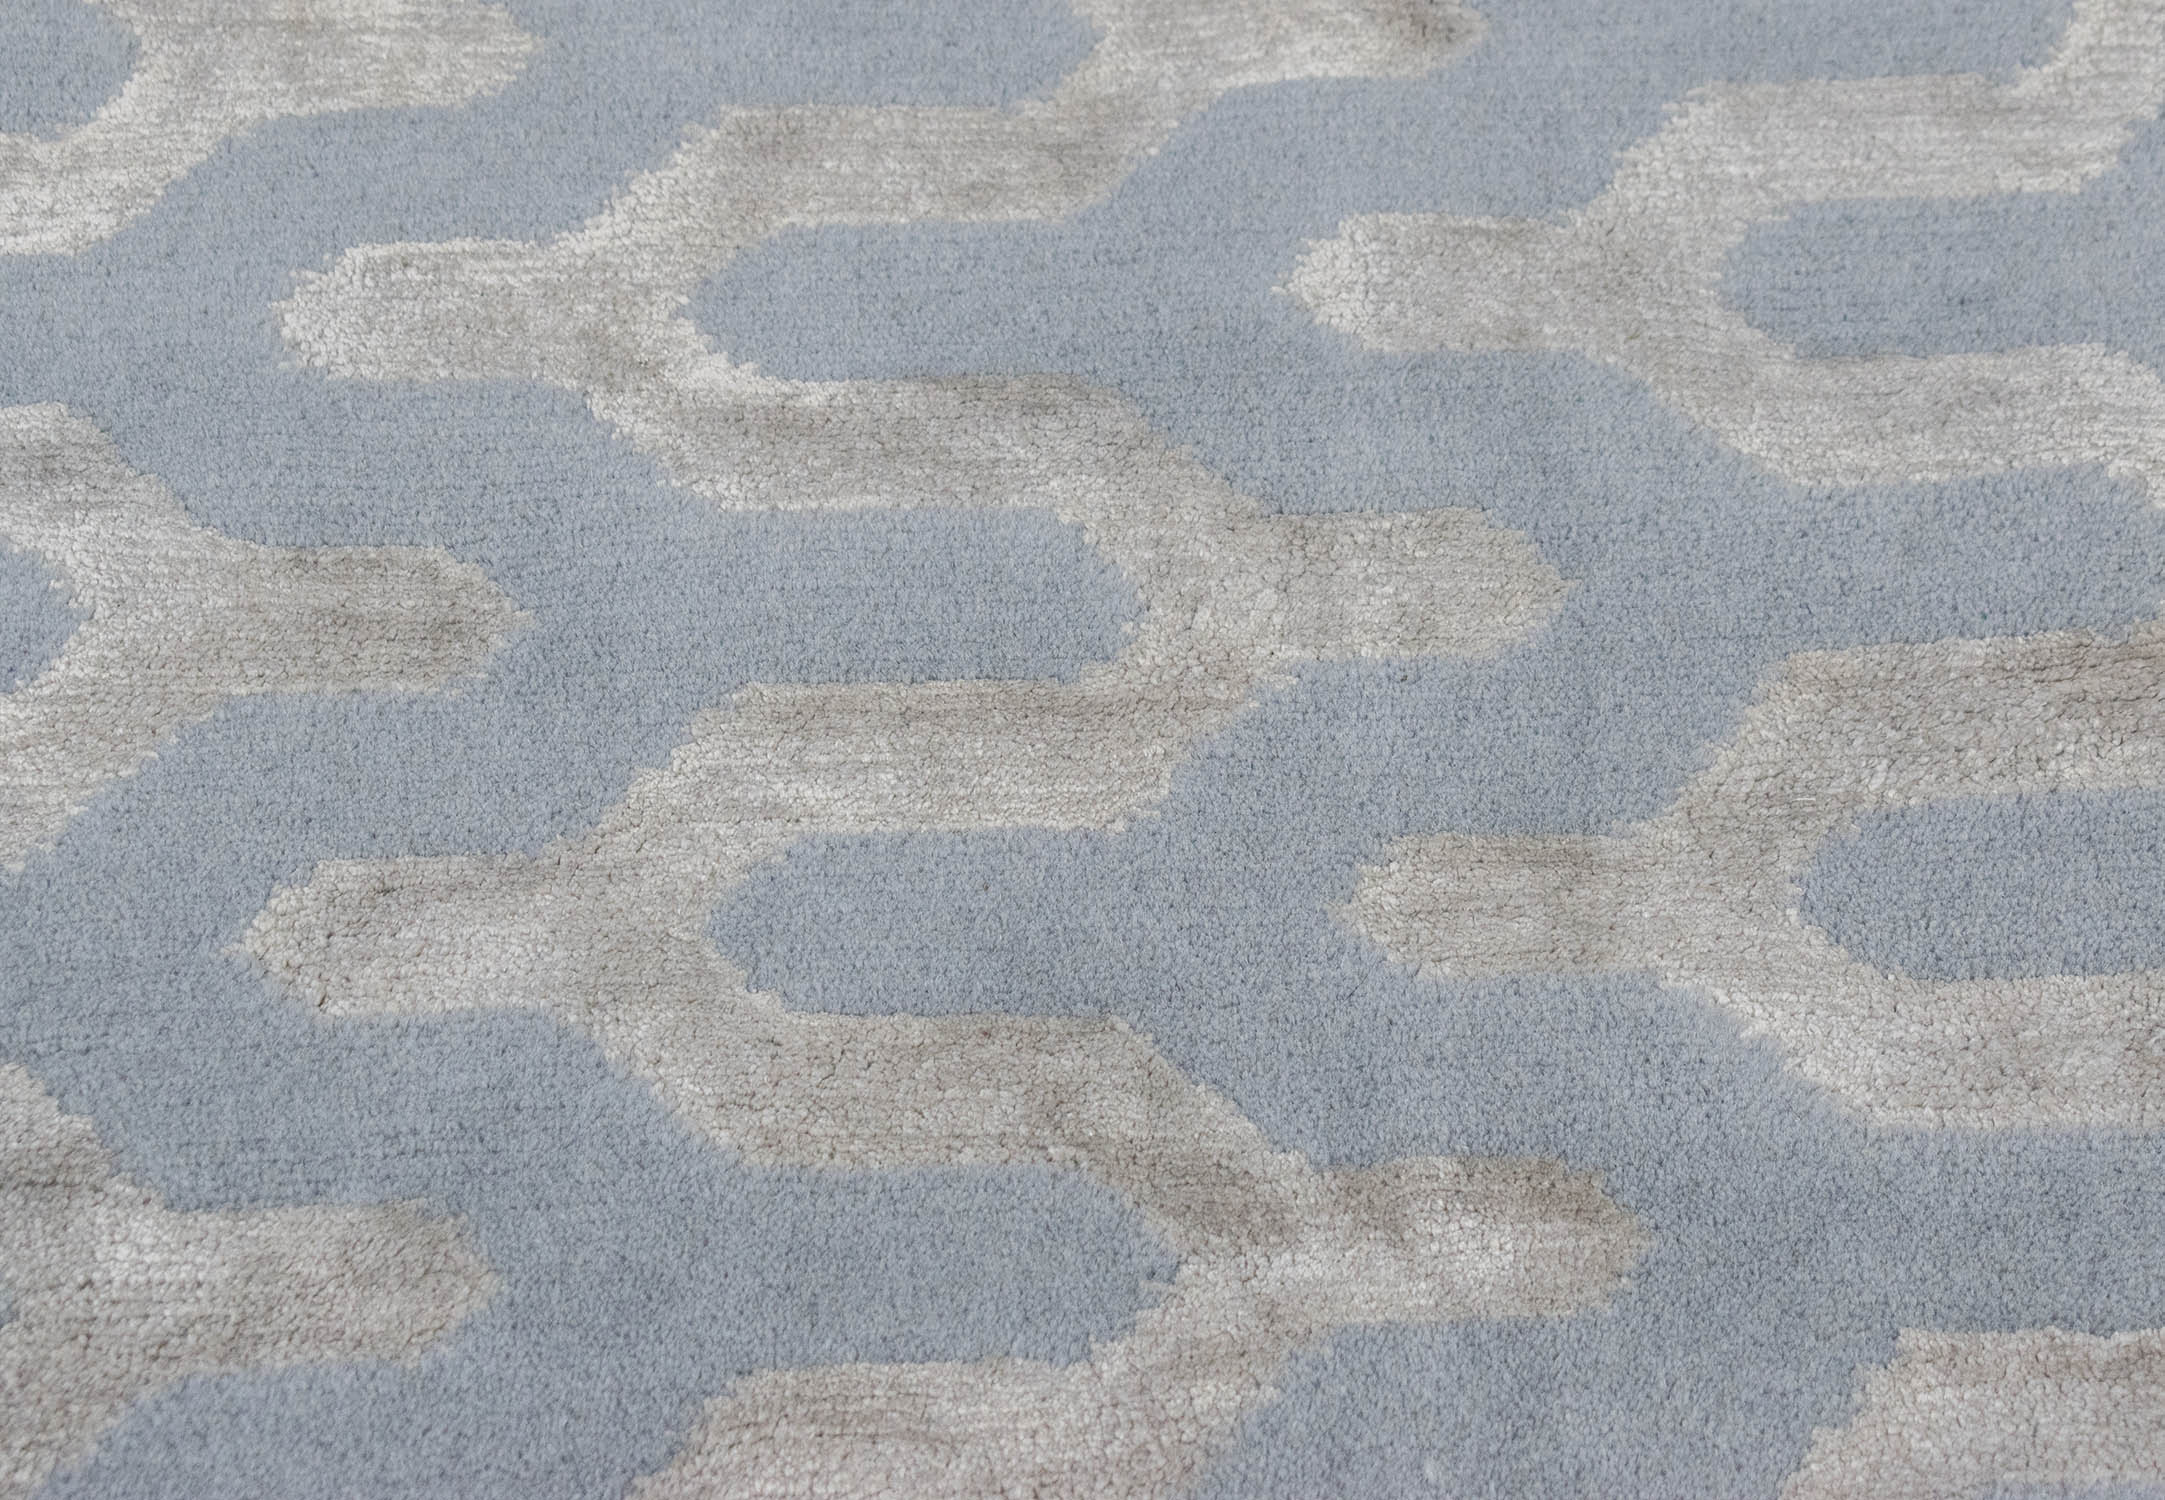 CONTEMPORARY TIGER DESIGN RUG COMPANY INSPIRED CARPET, wool and silk, 280cm x 180cm. - Image 3 of 3